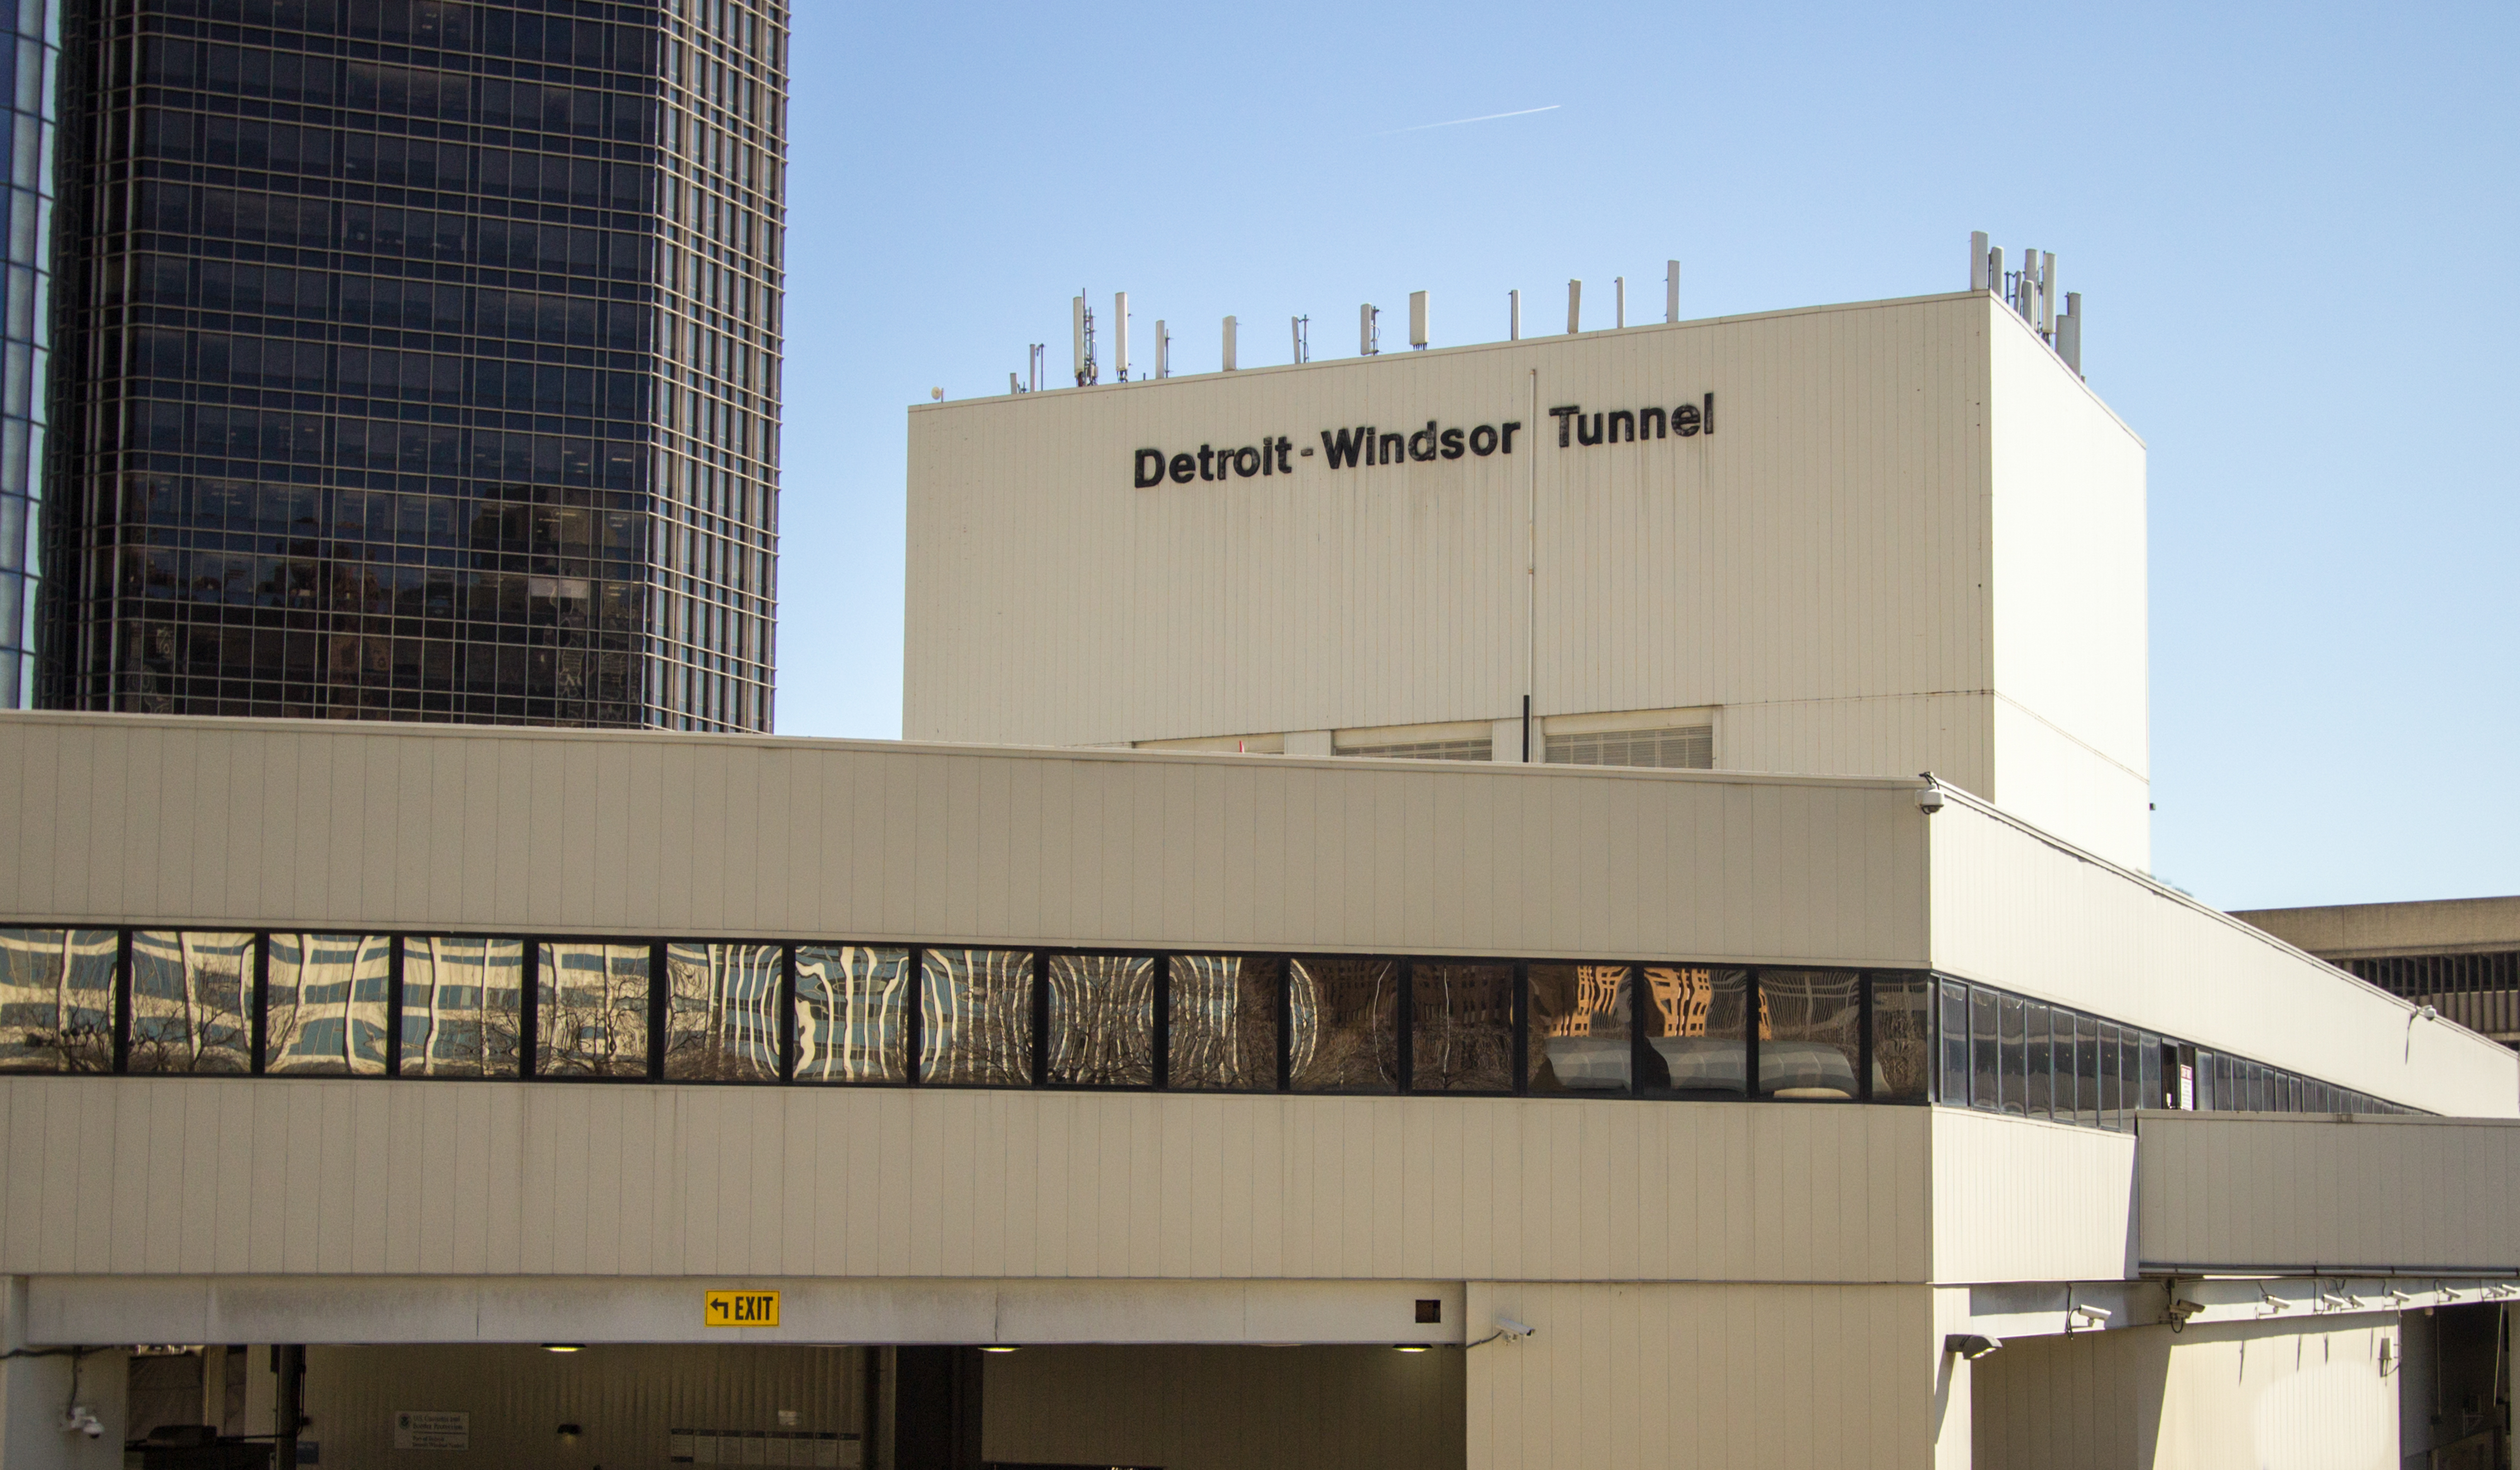 A photo of the exterior of the Detroit Windsor Tunnel